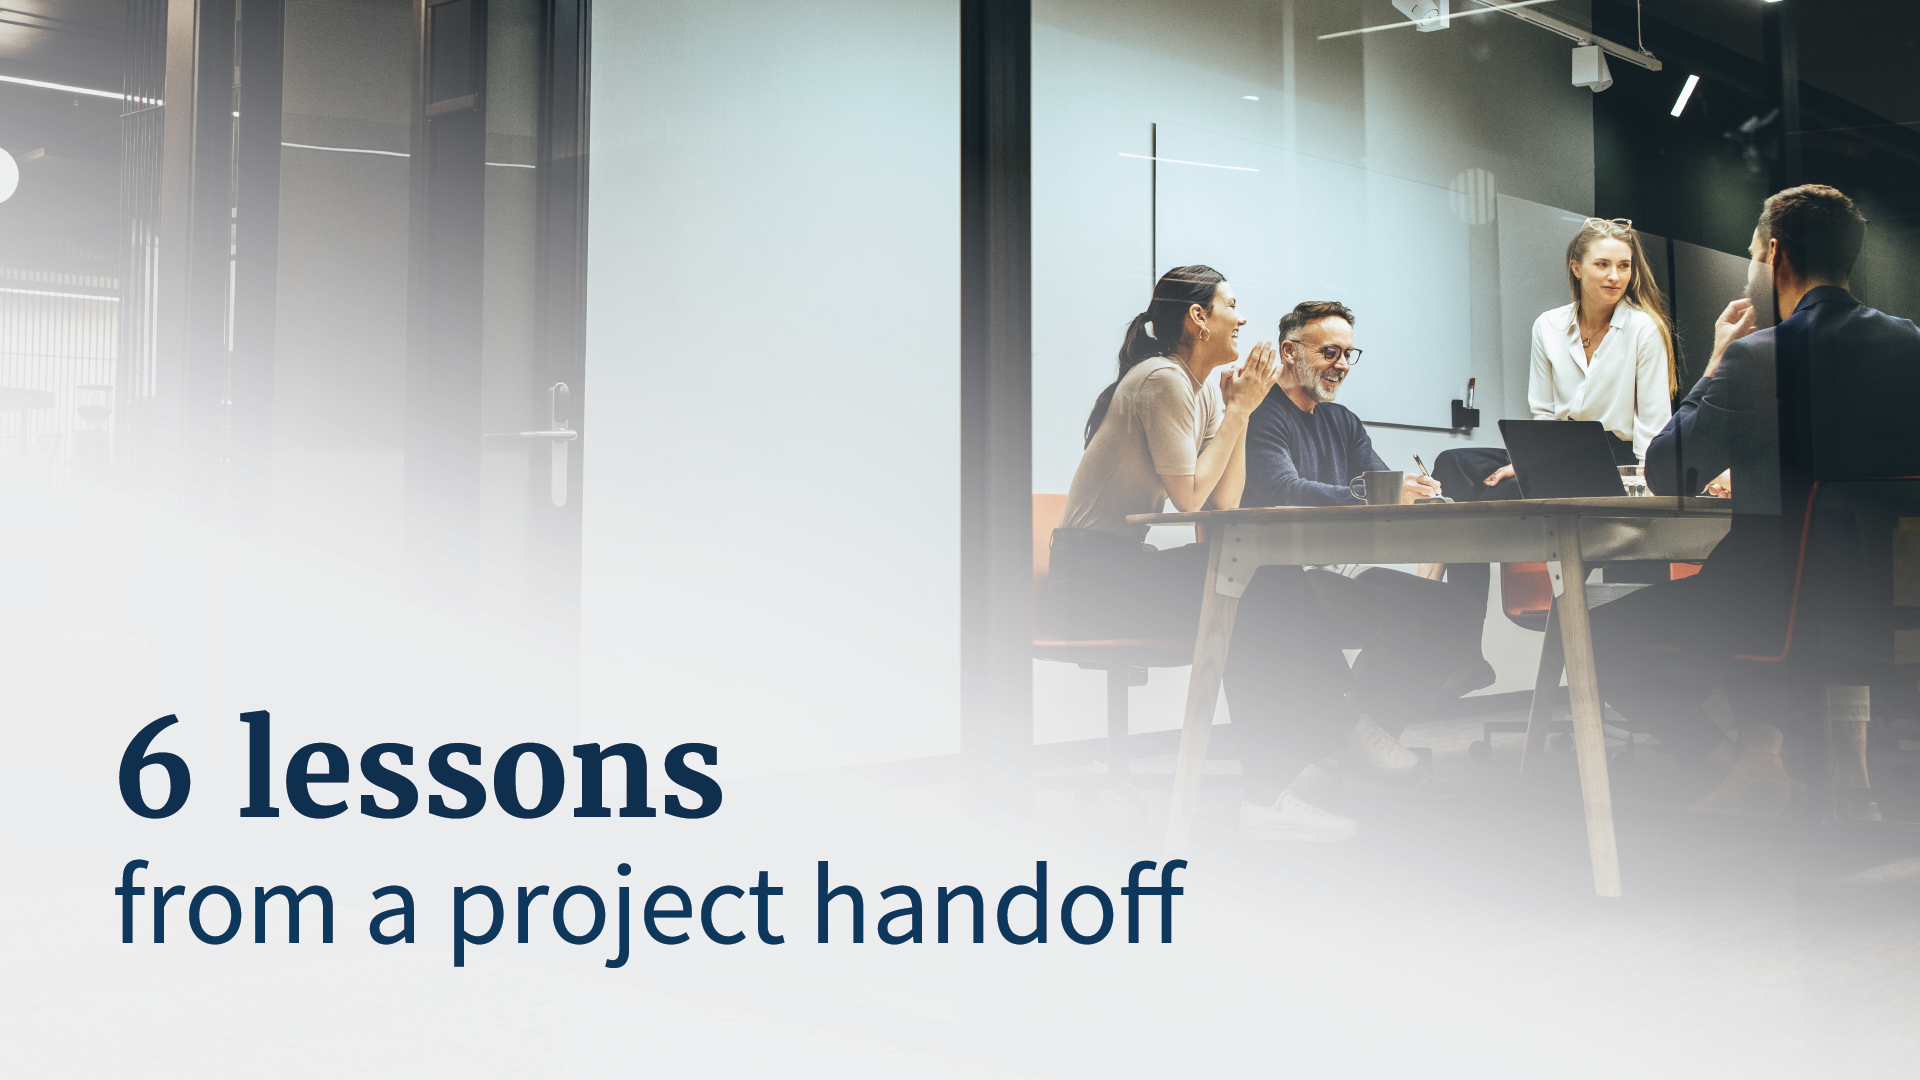 Work team in conference room talking. Text: 6 lessons from a project handoff